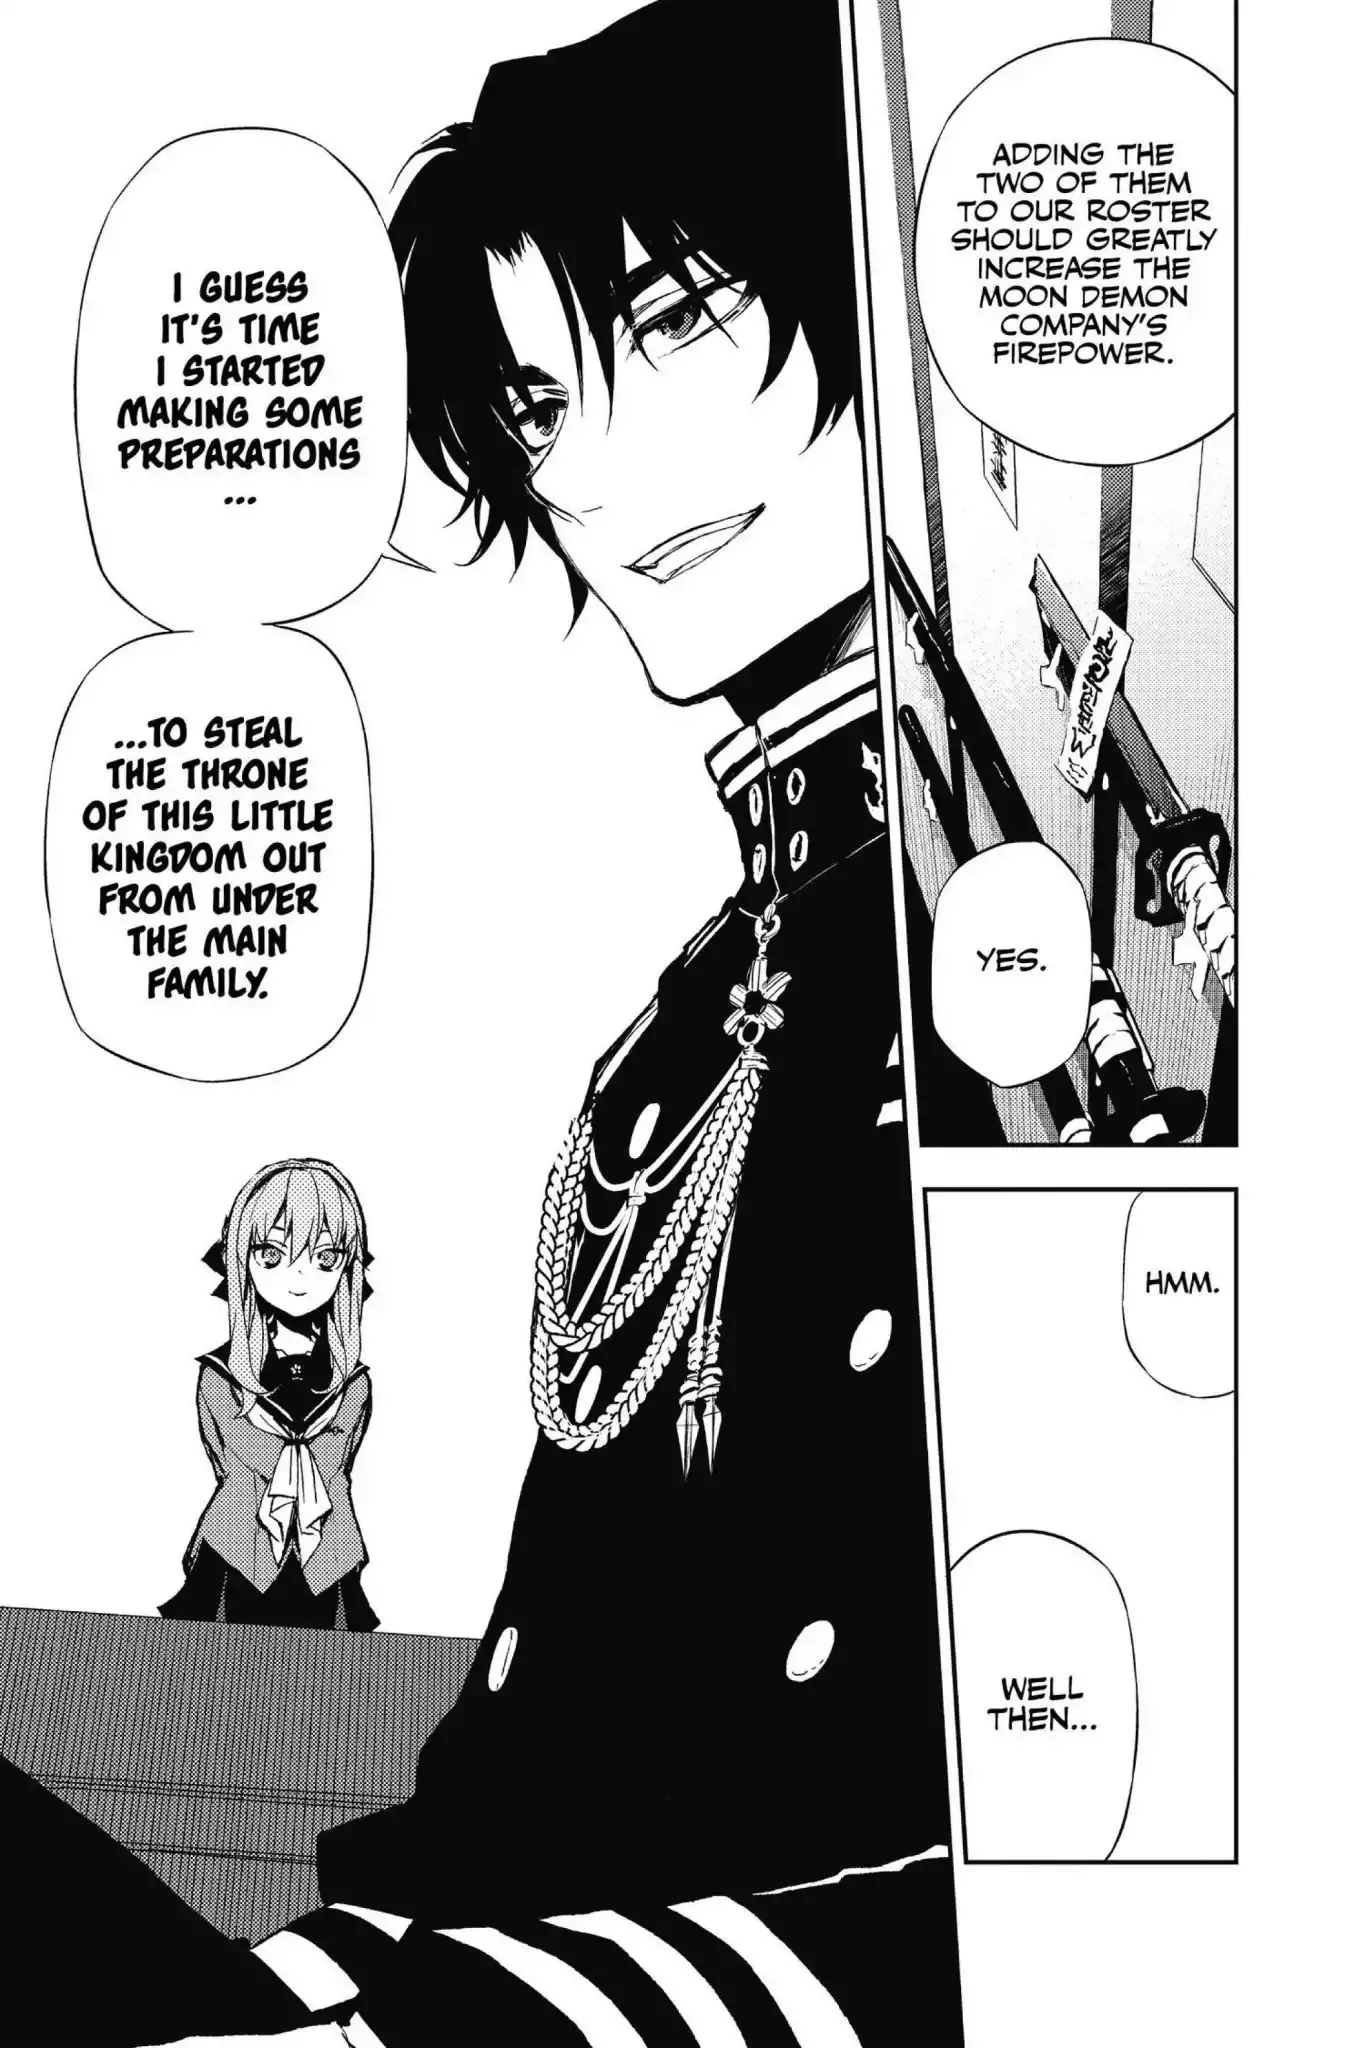 Seraph Of The End - 4 page 50-1ce8b1bb